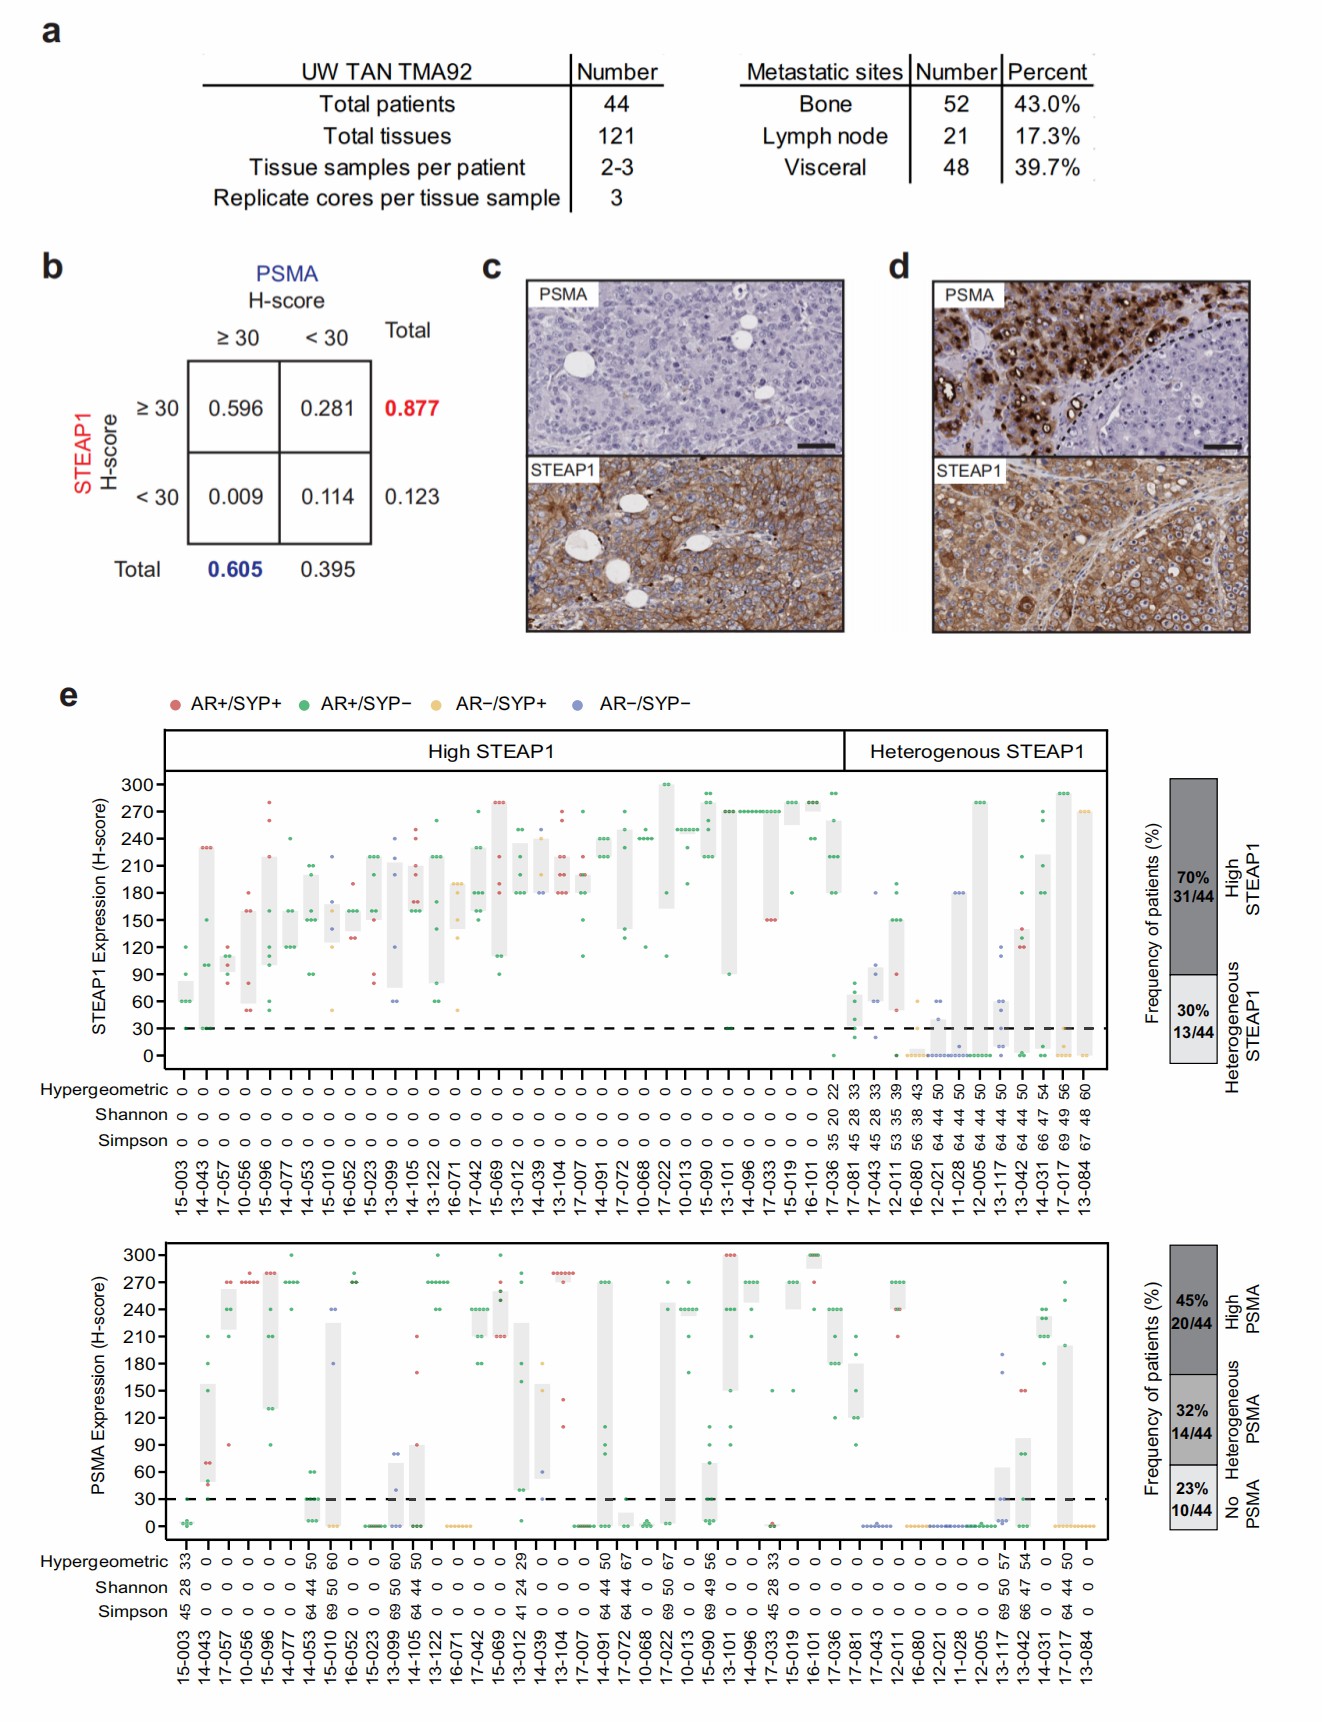 Characterization of STEAP1 and PSMA expression profile in mCRPC patients using immunohistochemistry. (Bhatia, et al., 2023)